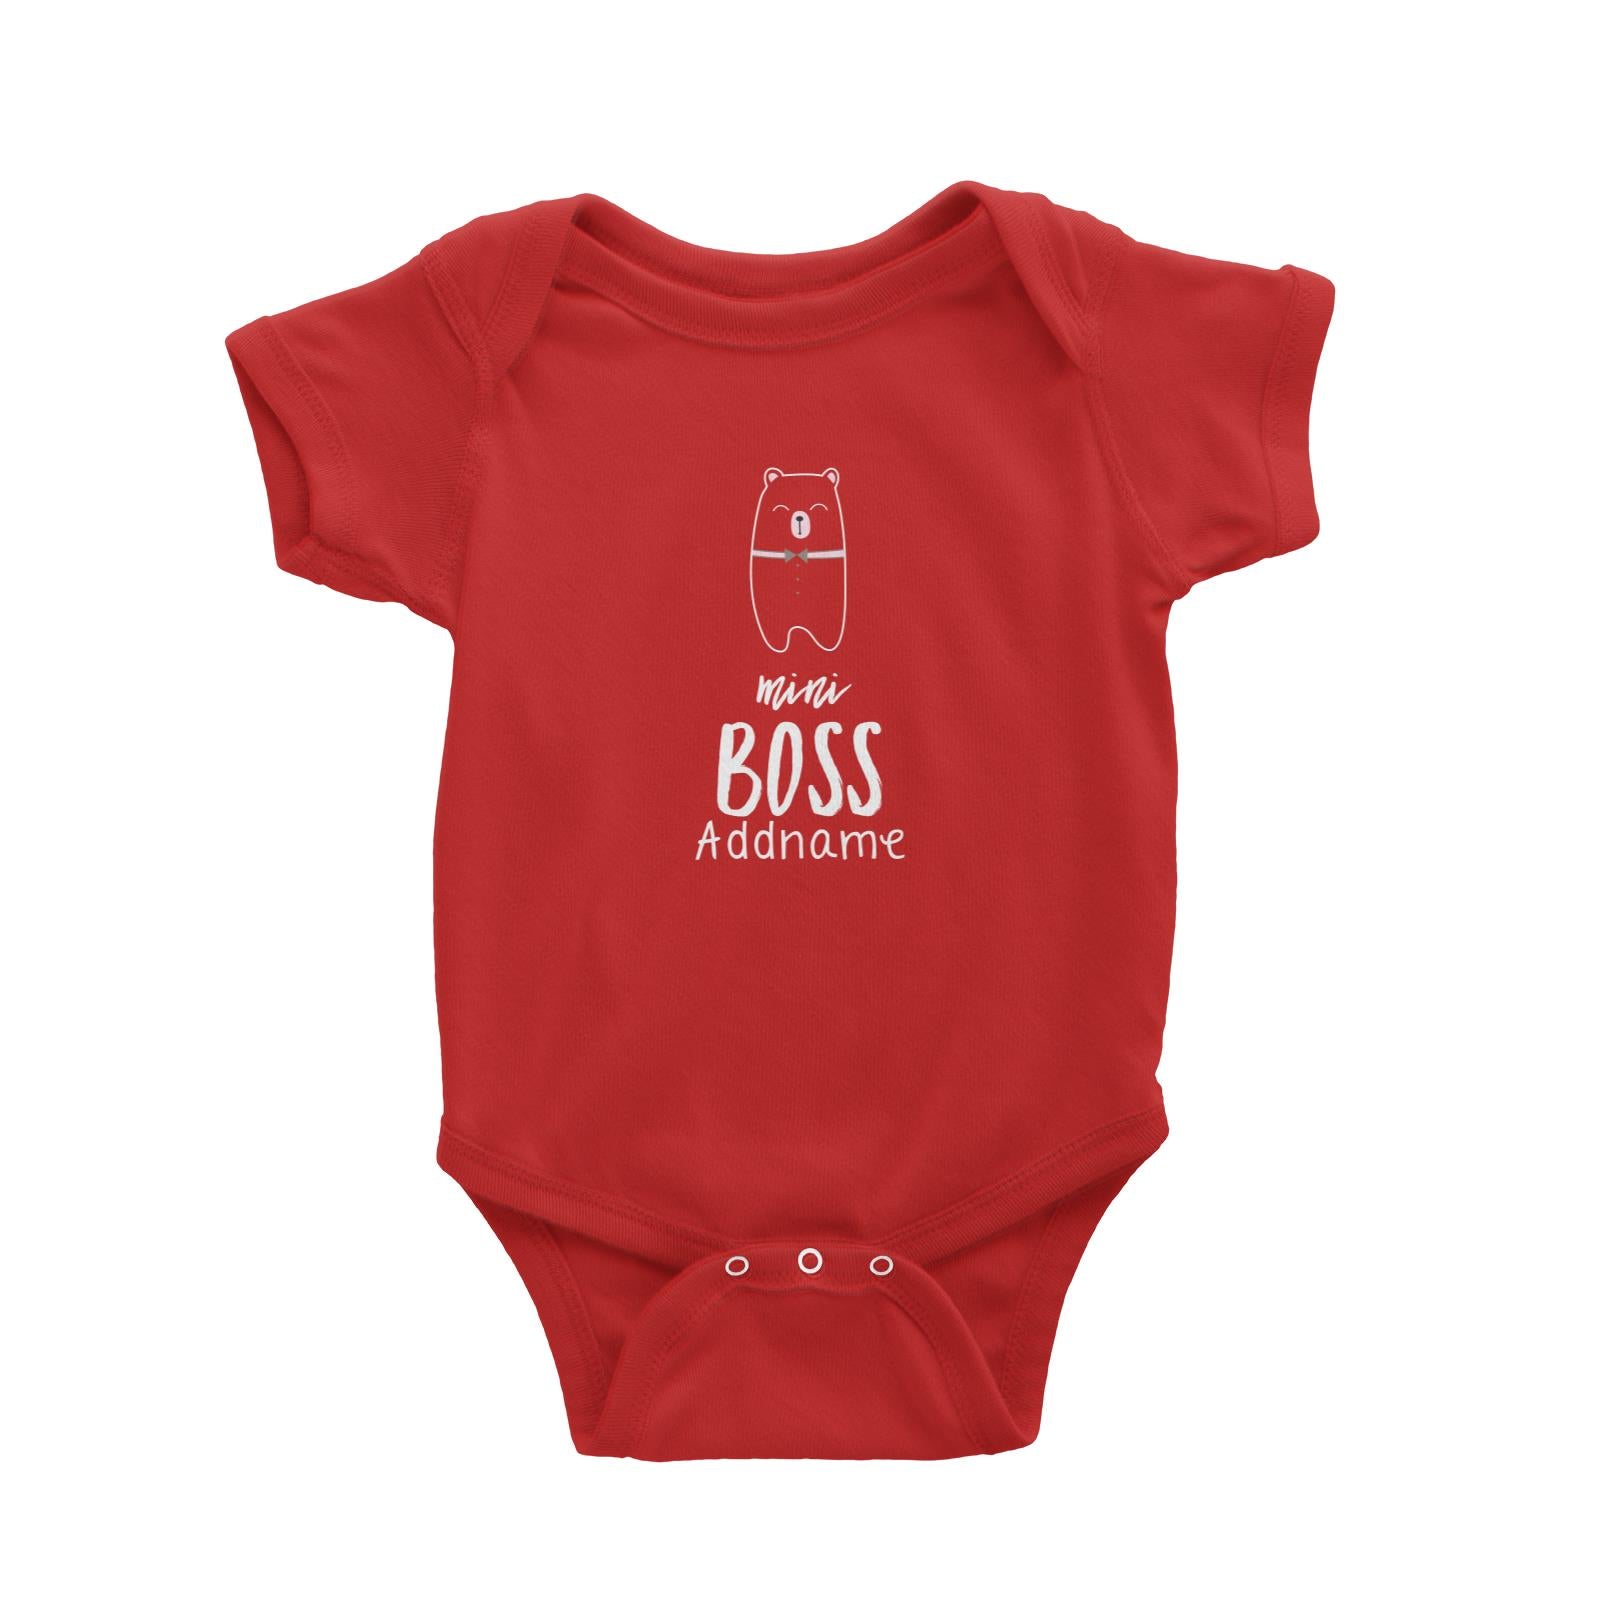 Cute Animals and Friends Series 2 Bear Mini Boss Addname Baby Romper